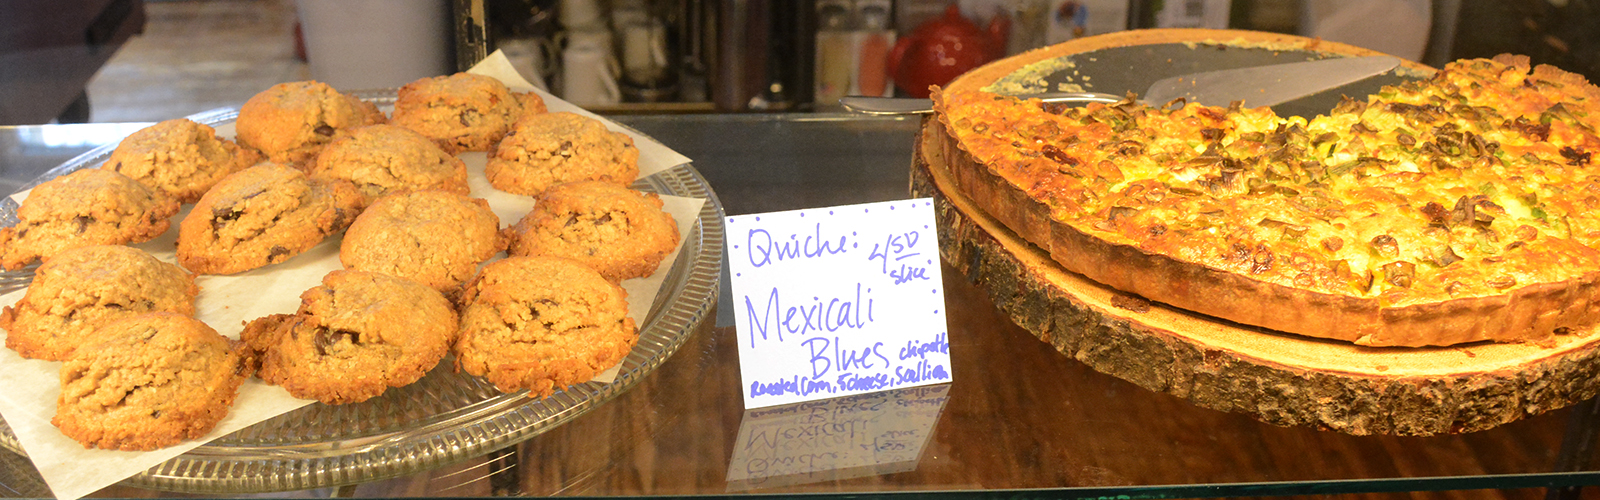 Om Nohm Gluten Free in Fredonia, N.Y., specializes in all-natural gluten-free food such as cookies and quiche, made with locally sourced ingredients.